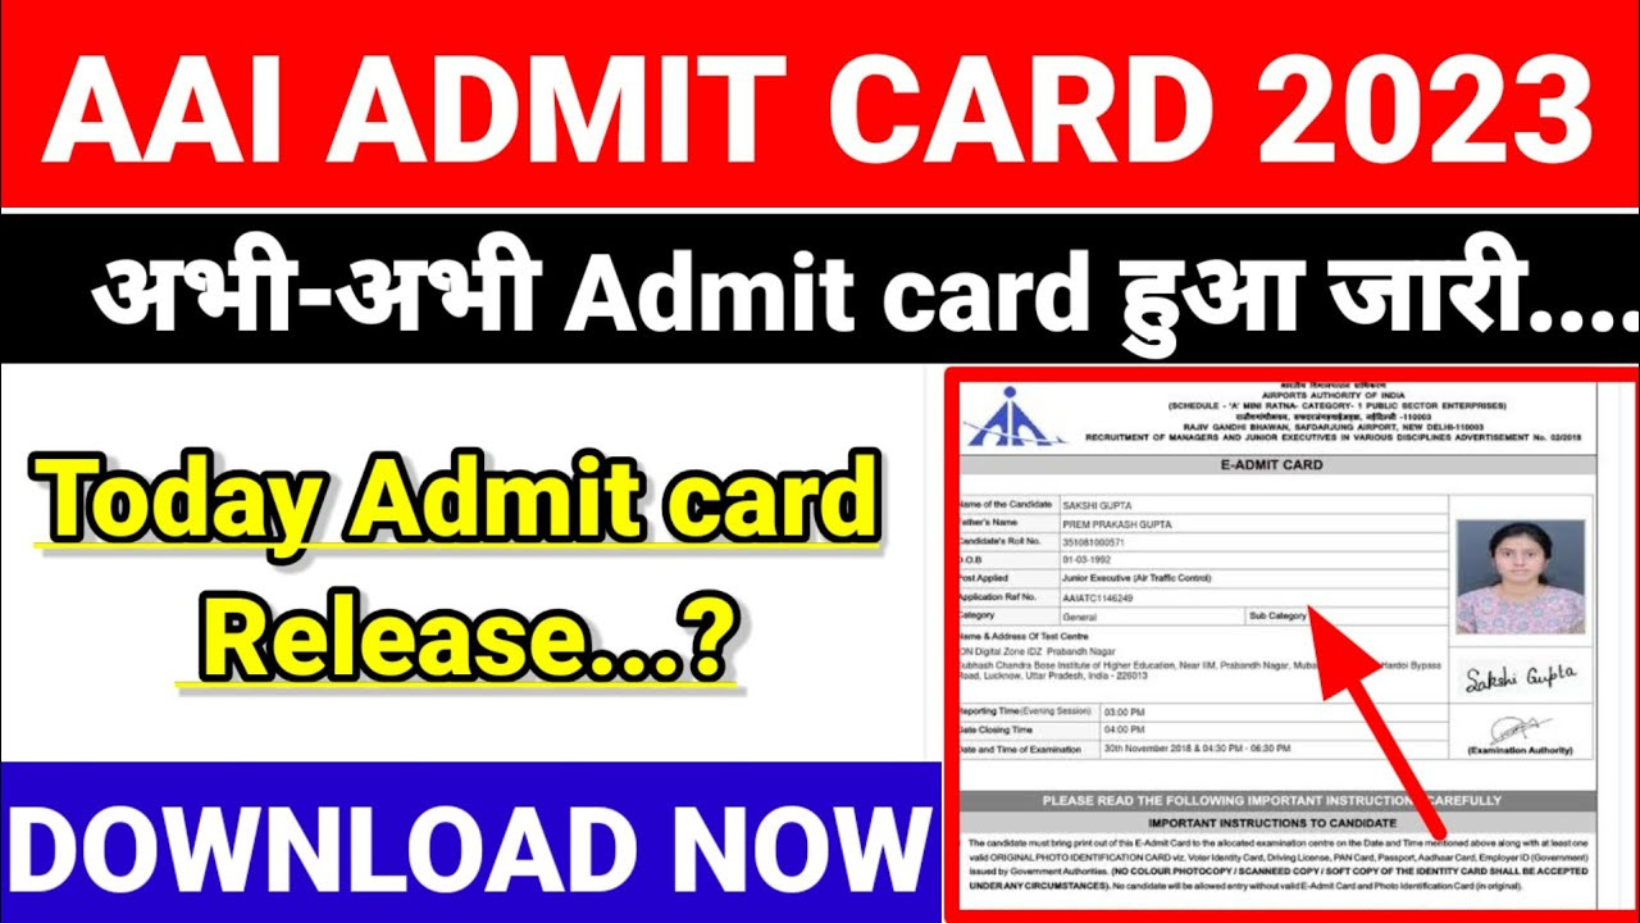 Upcoming Release: AAI 2023 Admit Cards for Junior Executives and Assistants at aai.aero